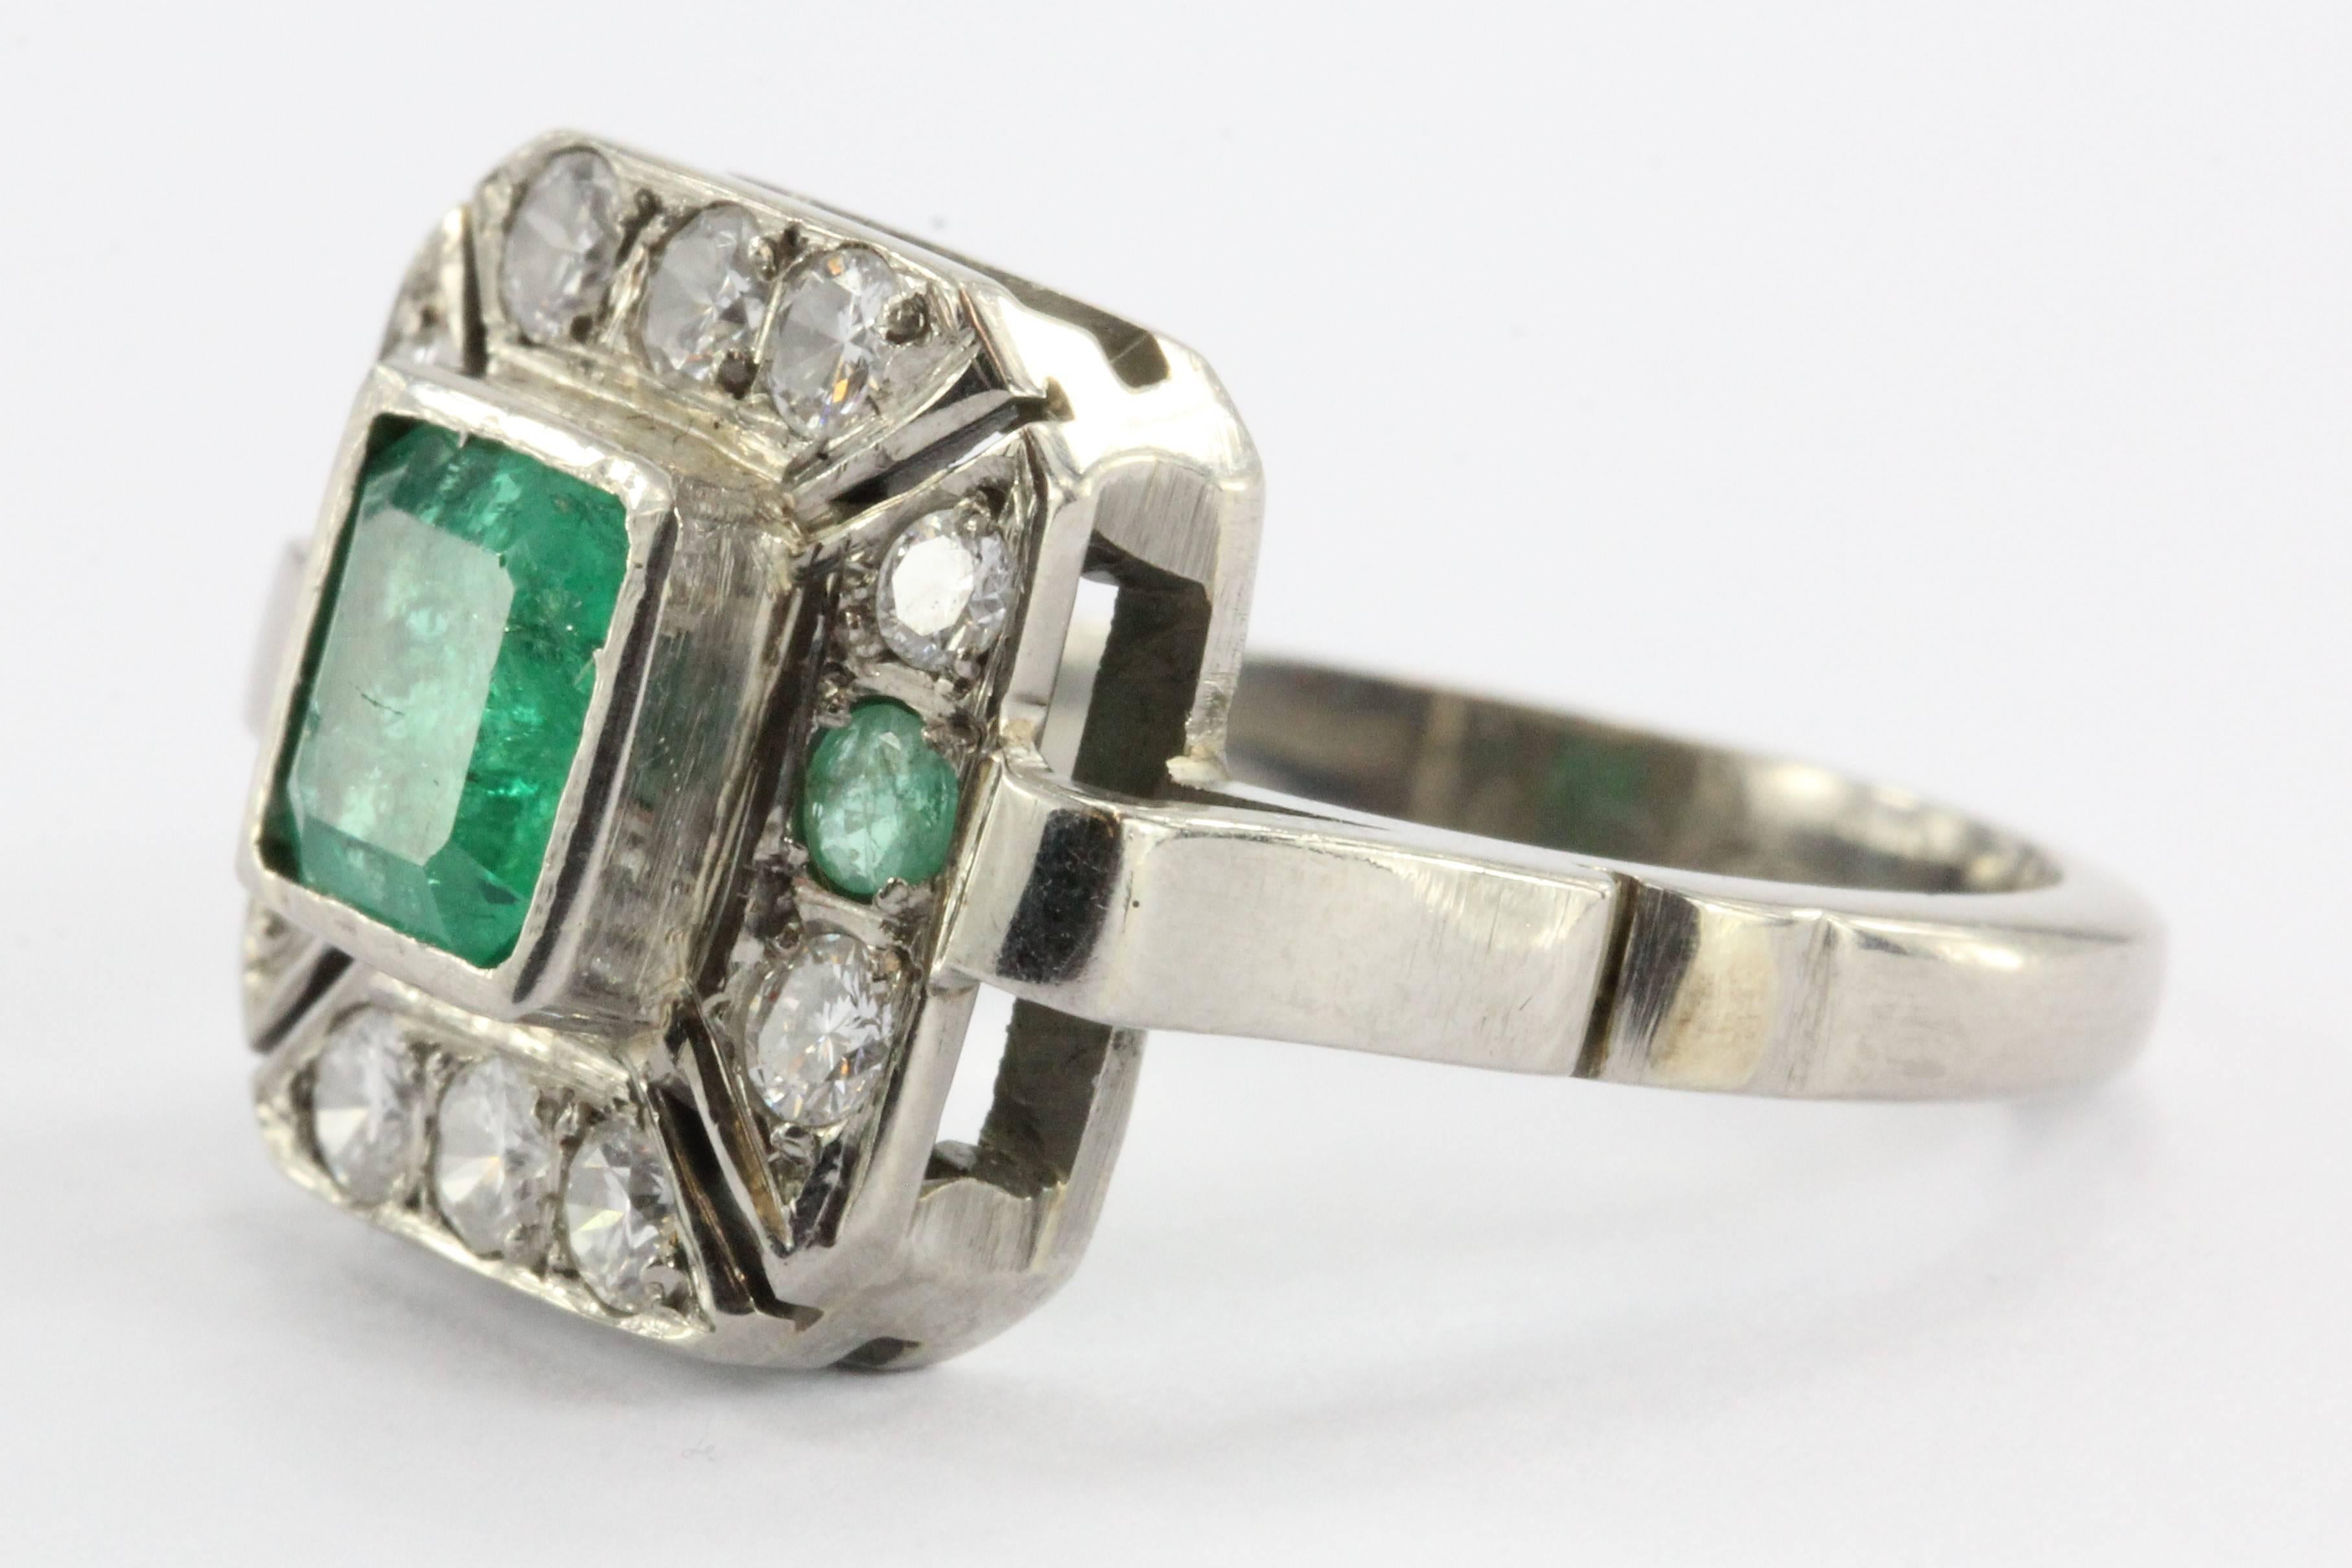 Art Deco Emerald & Diamond Engagement Ring set in platinum. The ring is of a thick sturdy construction and it has and will hold up to regular wear. The center stone is a square cut 1 carat emerald. The emerald is a brilliant vibrant green with